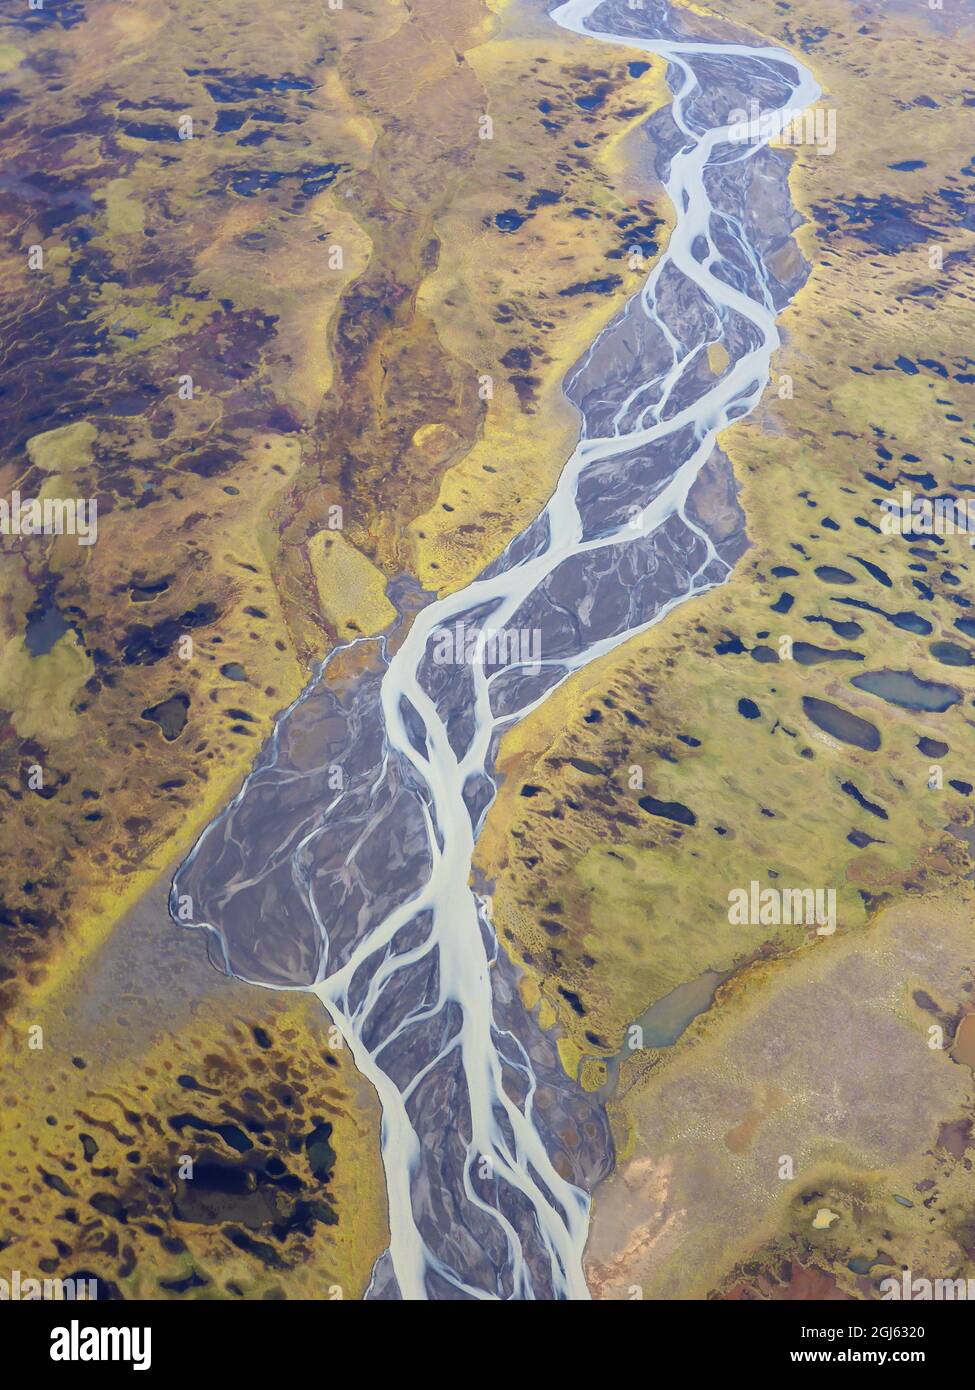 Aerial photo of a braided river on a barren green and brown landscape. Stock Photo